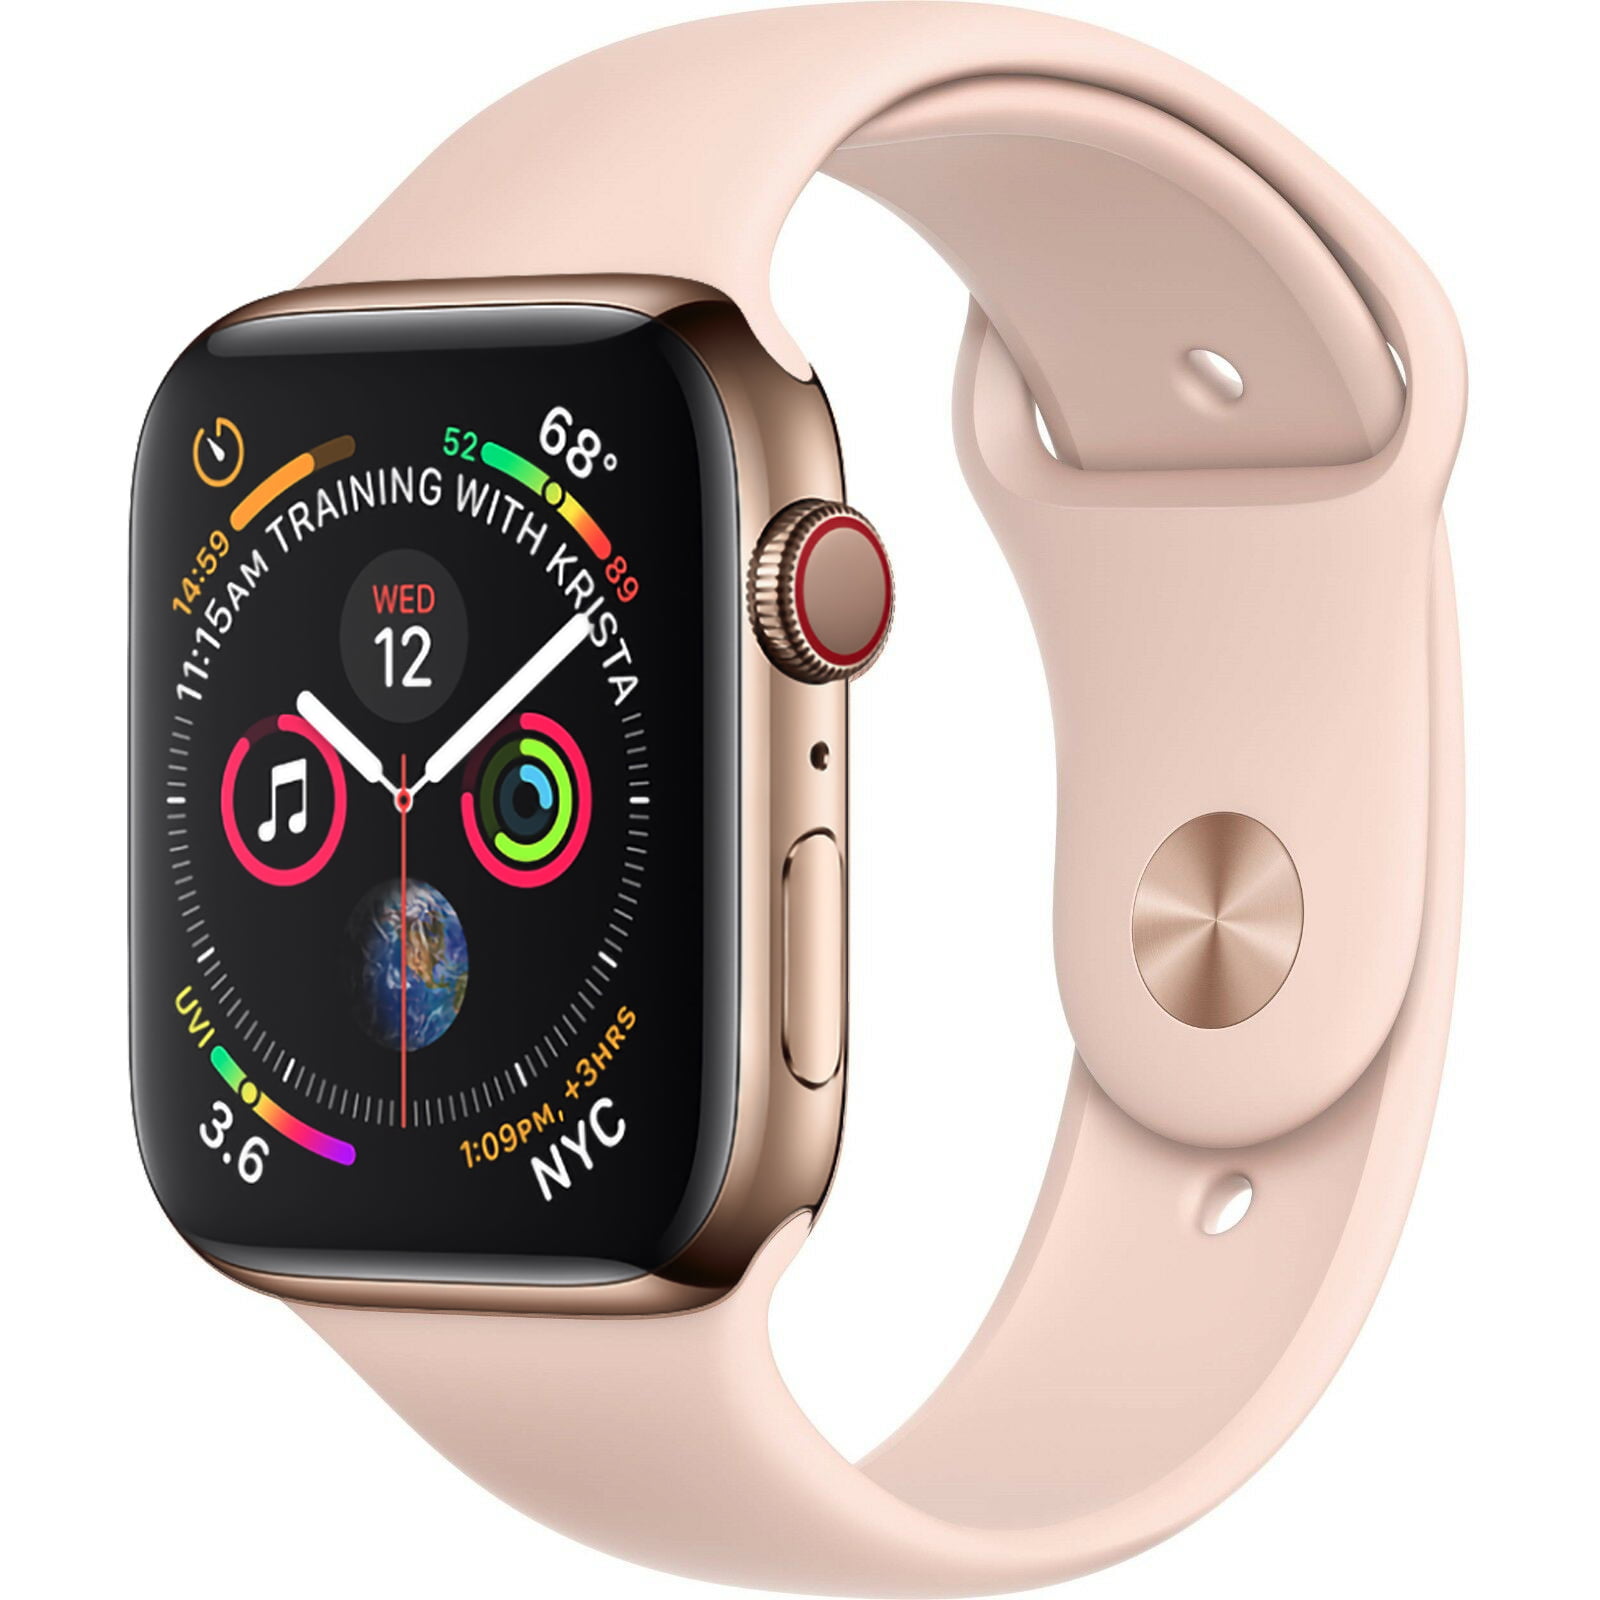 Refurbished Apple Watch Series 4 44mm GPS + Cellular 4G LTE - Stainless